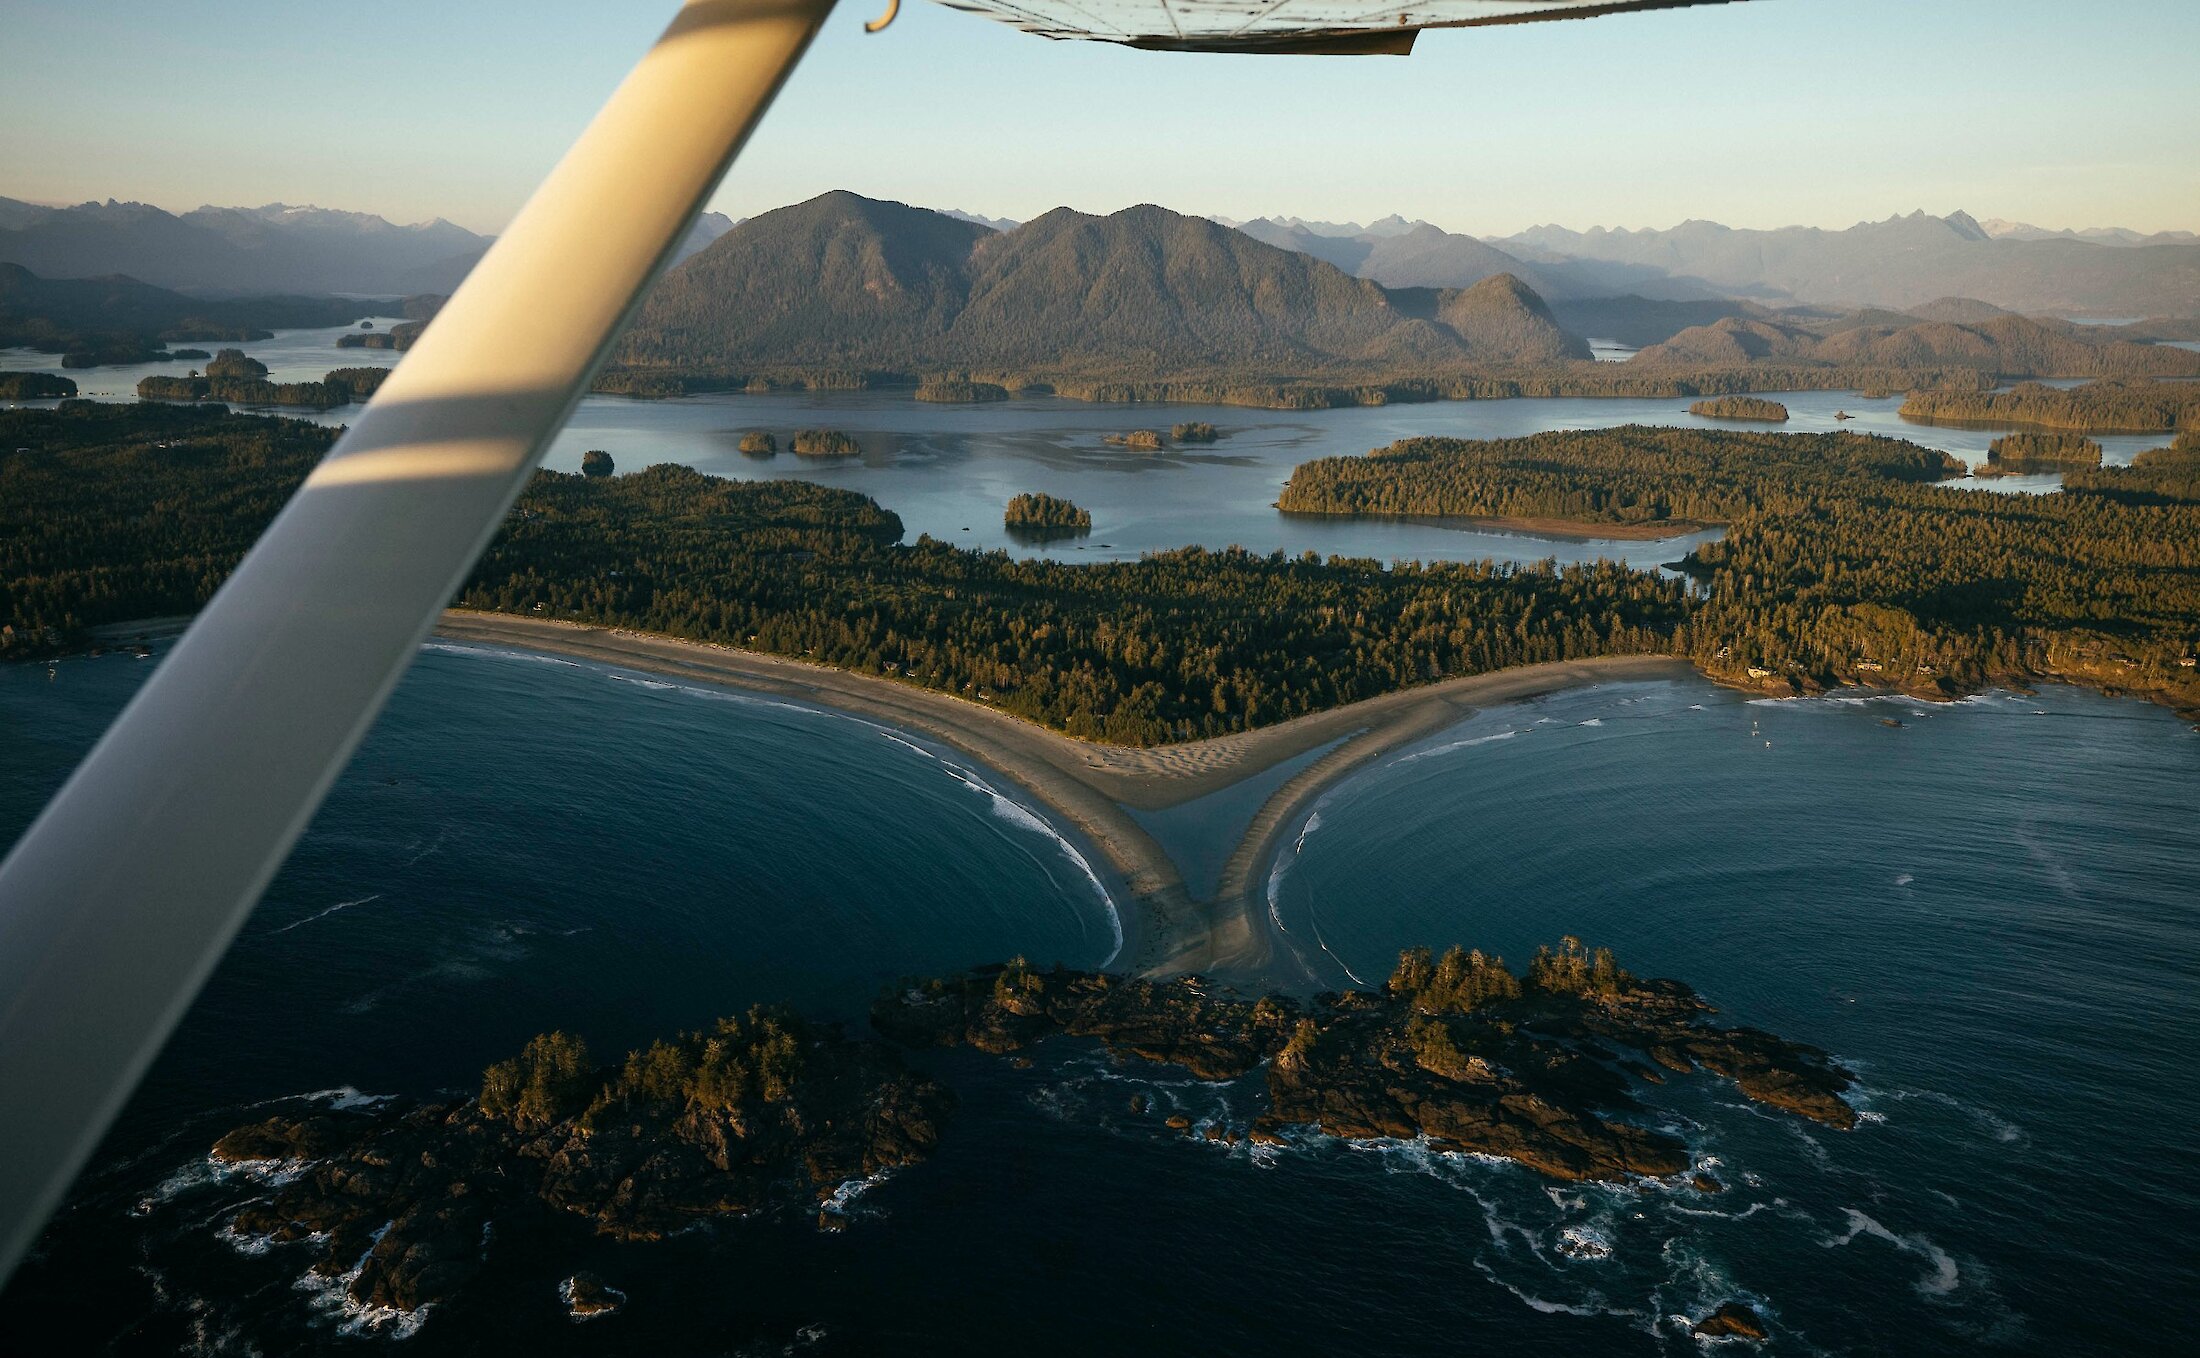 View from a seaplane looking down at islands